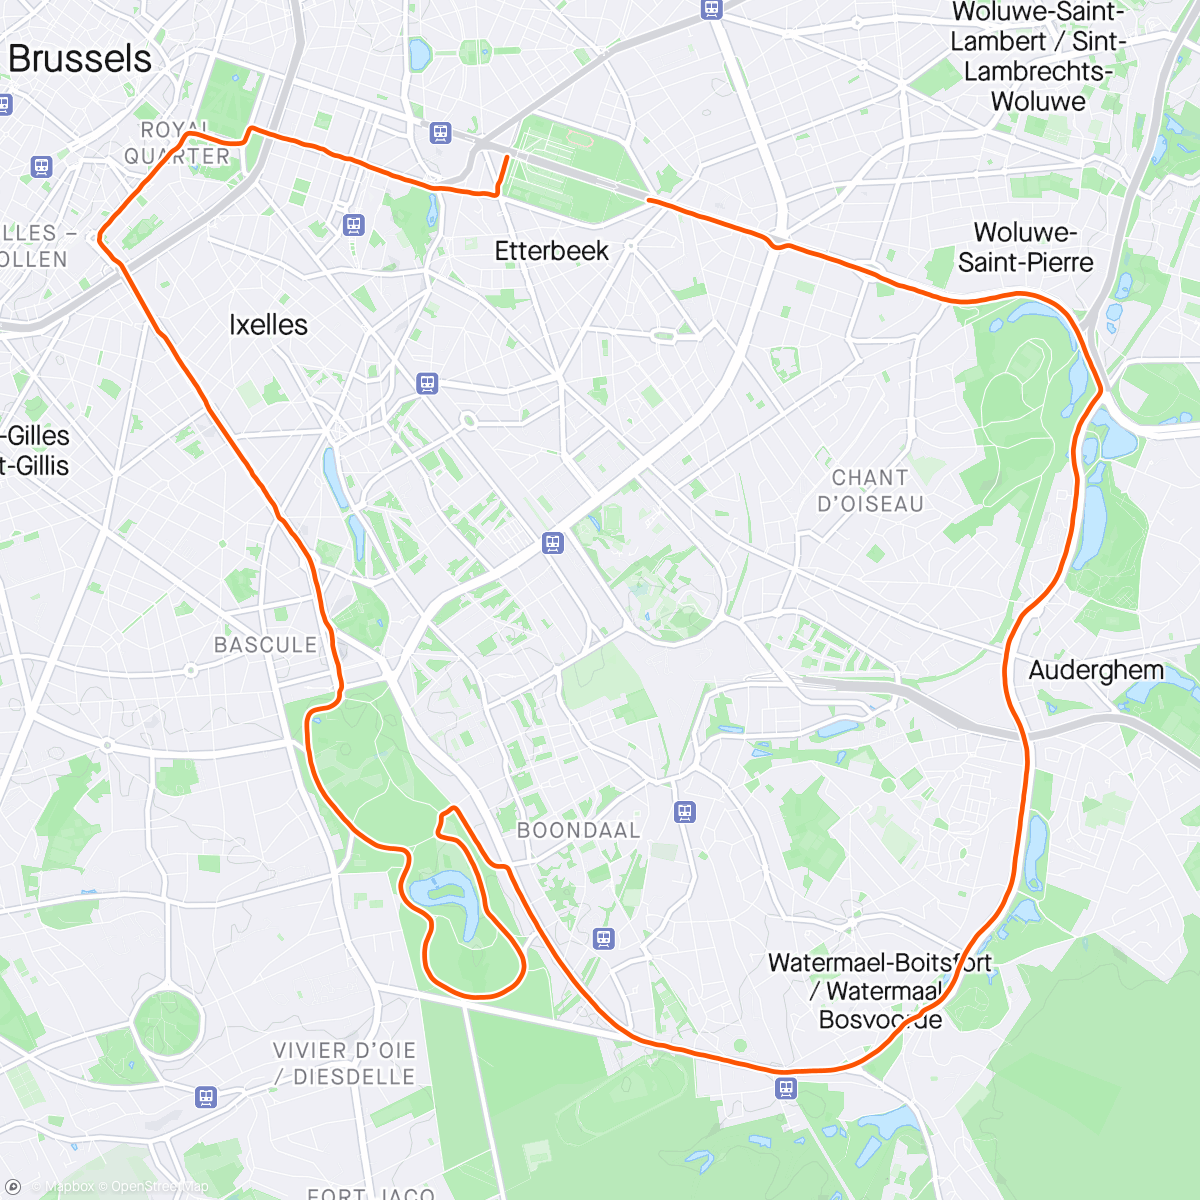 Карта физической активности (20 KM BRUXELLES RACE 💪 in 1h:26’:19” - pace of 4’:19”/km with 175 m elevation ❤️ Running with 43252 runners was incredibile 🤩)